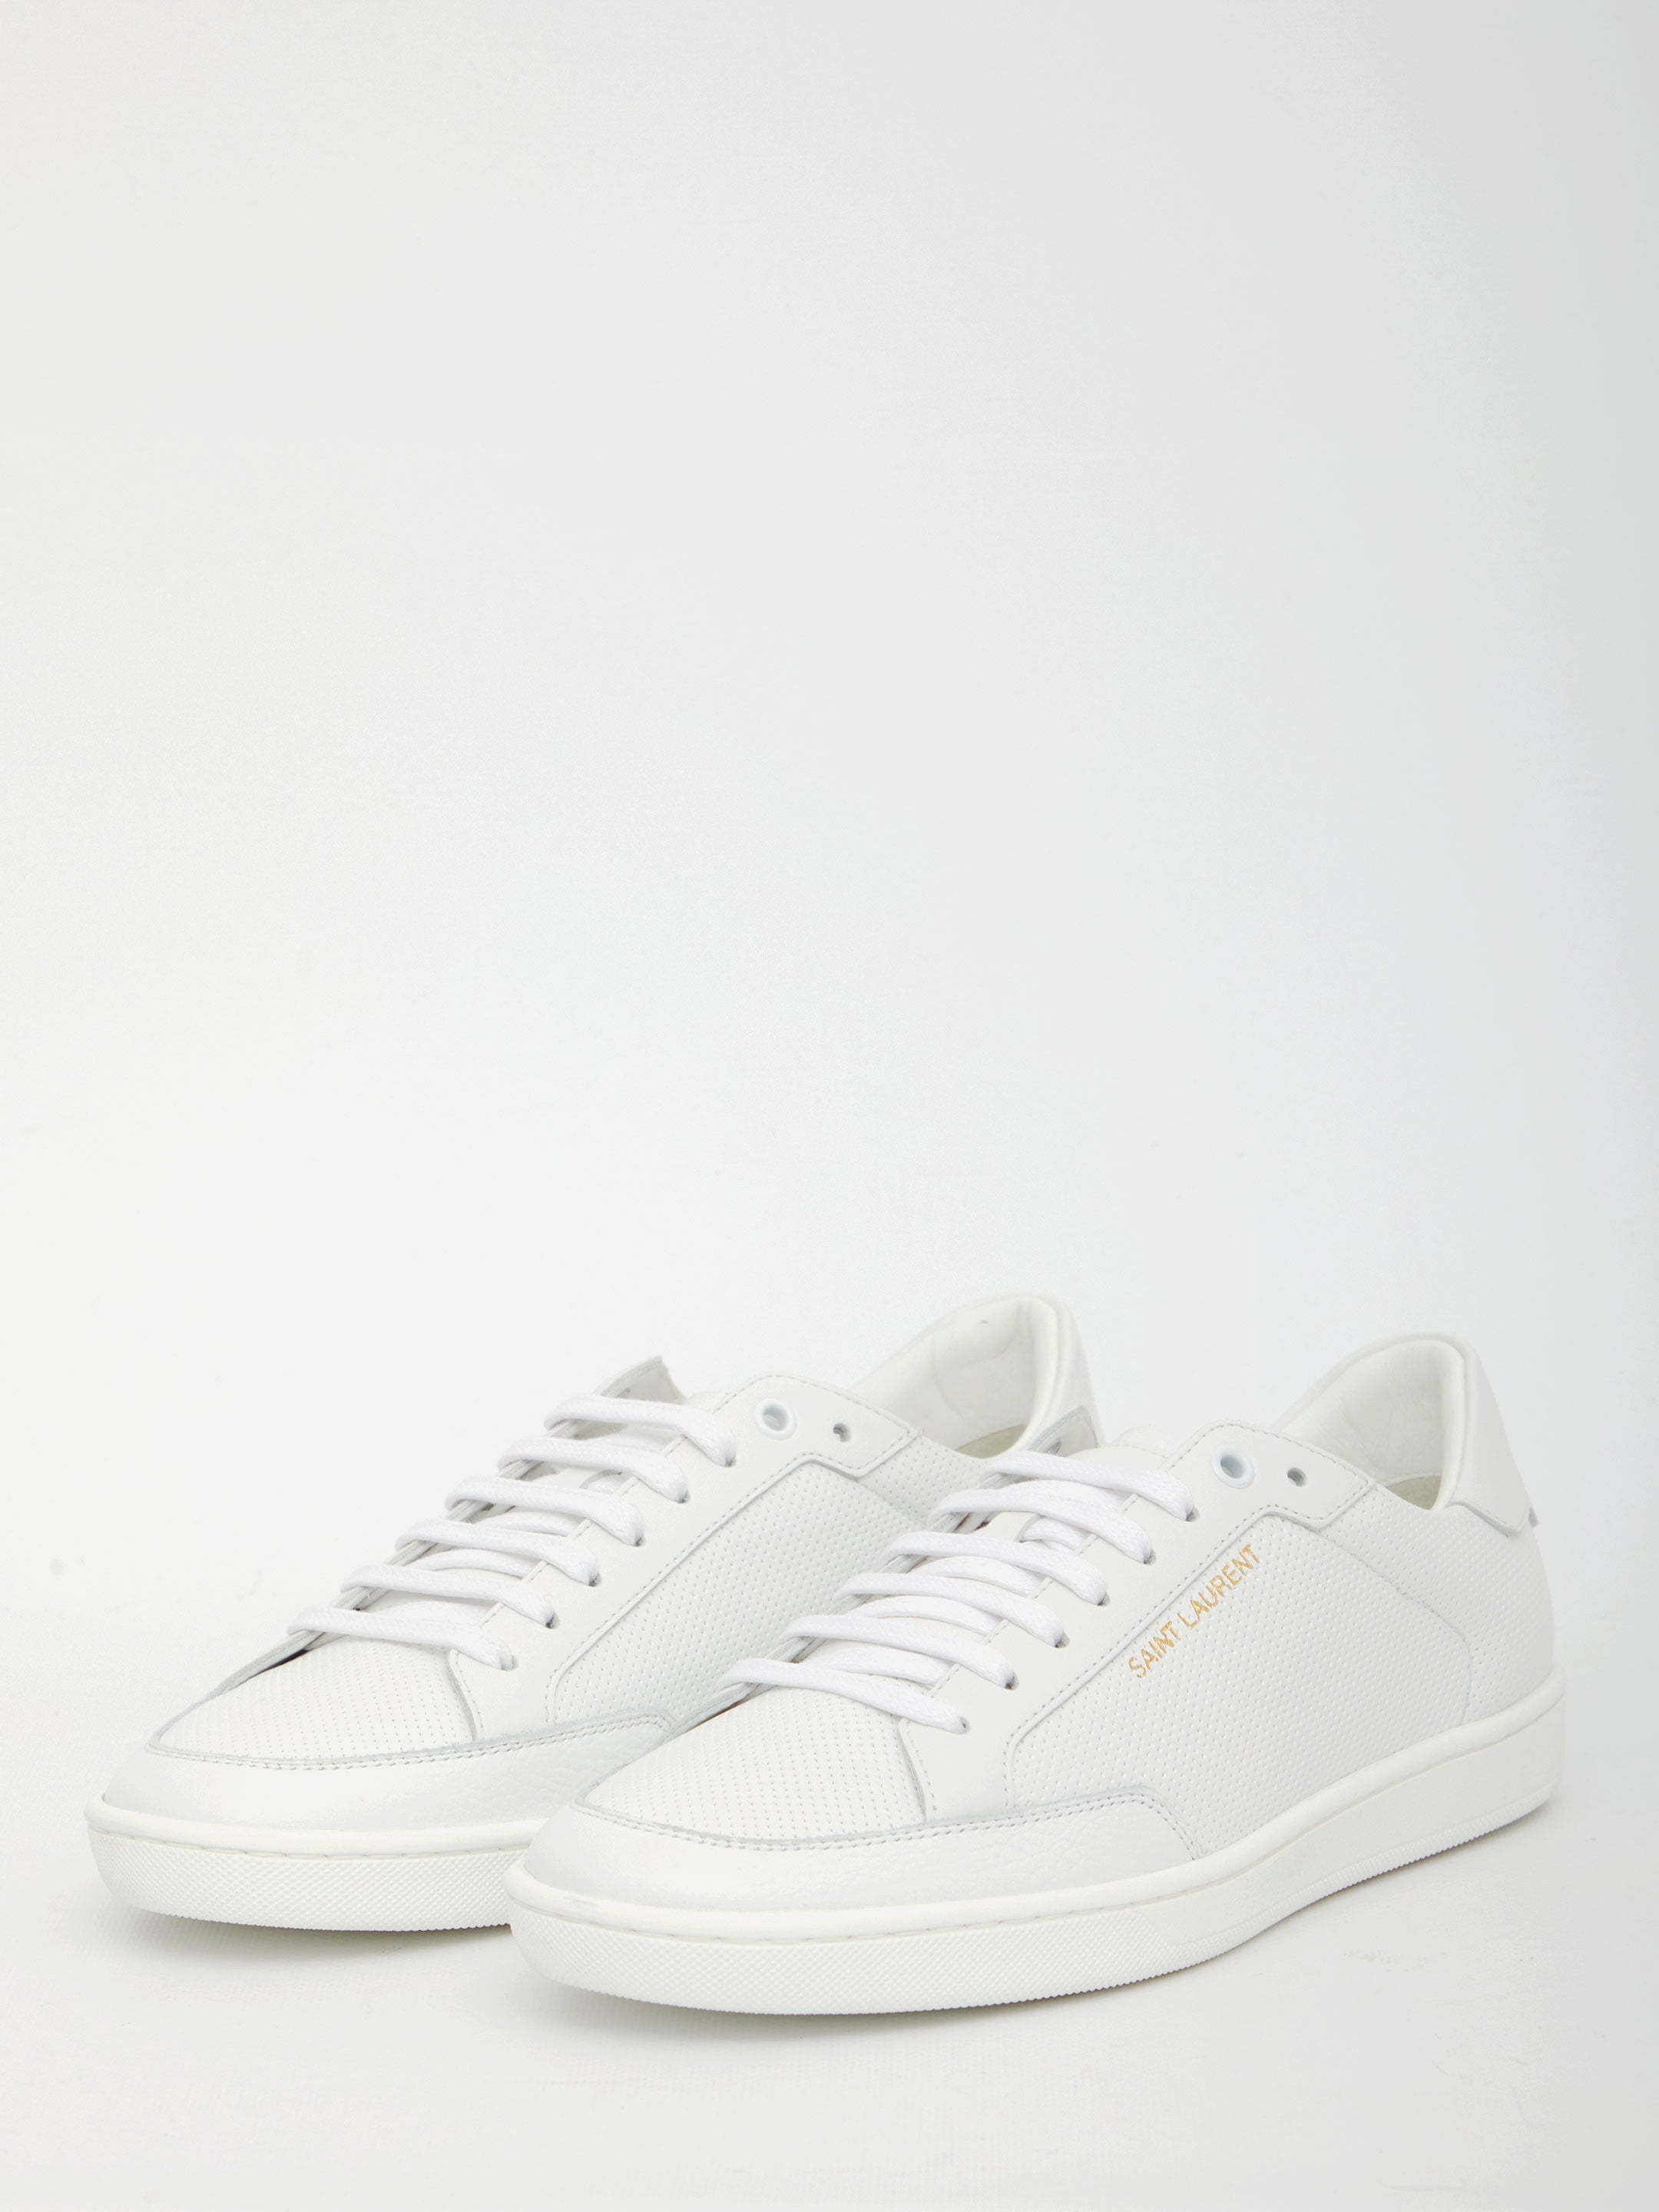 SAINT-LAURENT-OUTLET-SALE-Court-Classic-SL10-sneakers-Sneakers-ARCHIVE-COLLECTION-2.jpg